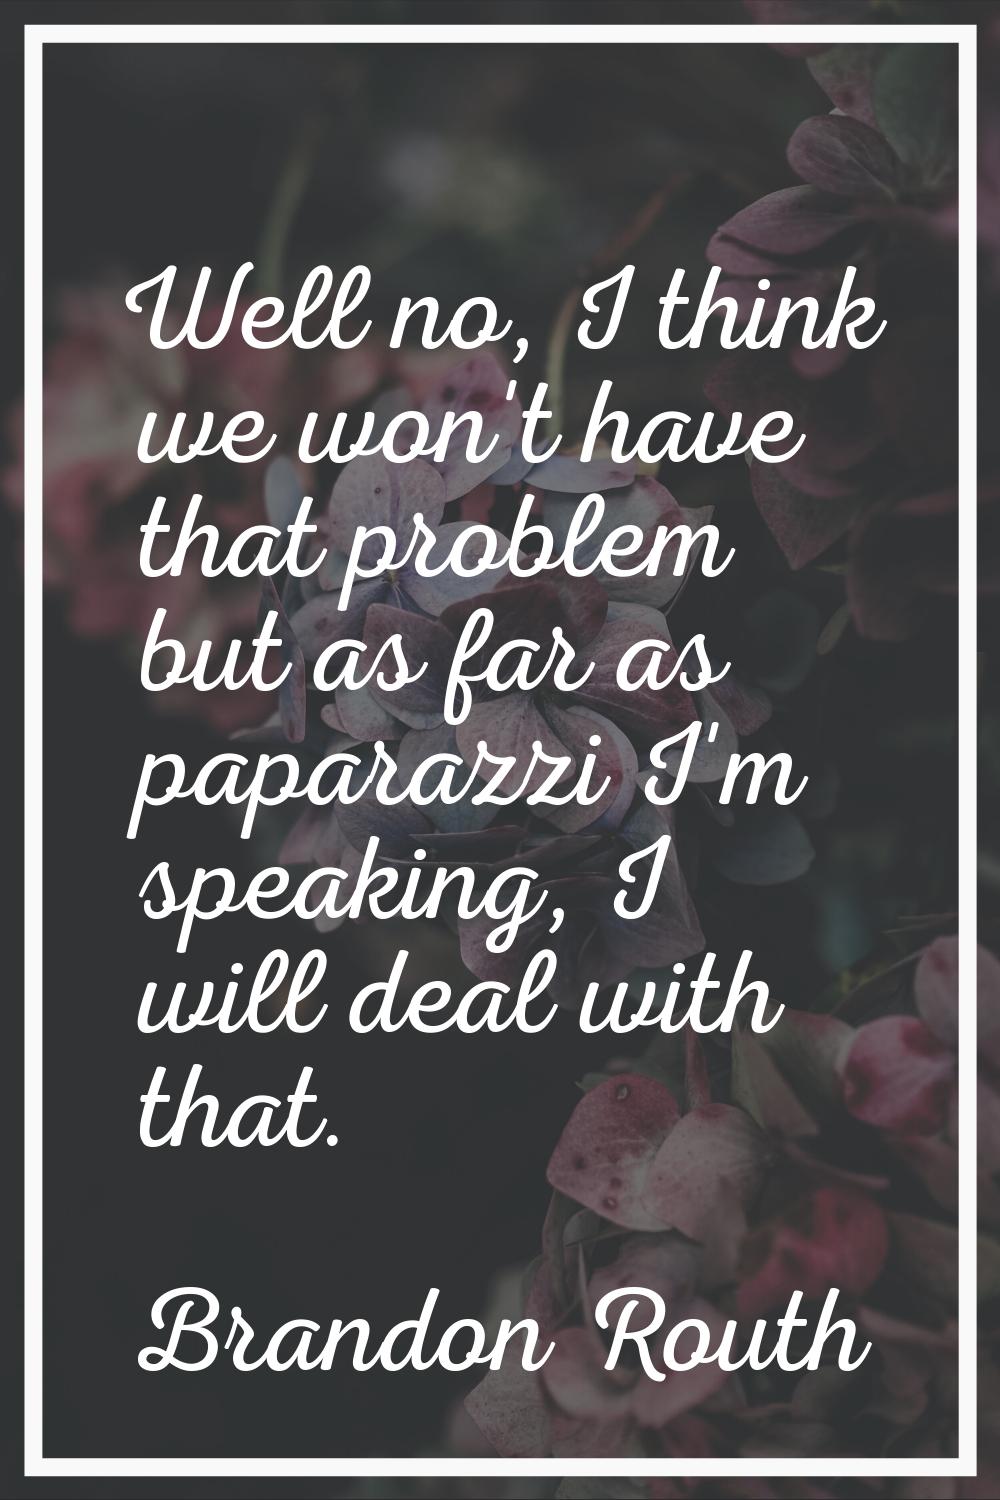 Well no, I think we won't have that problem but as far as paparazzi I'm speaking, I will deal with 